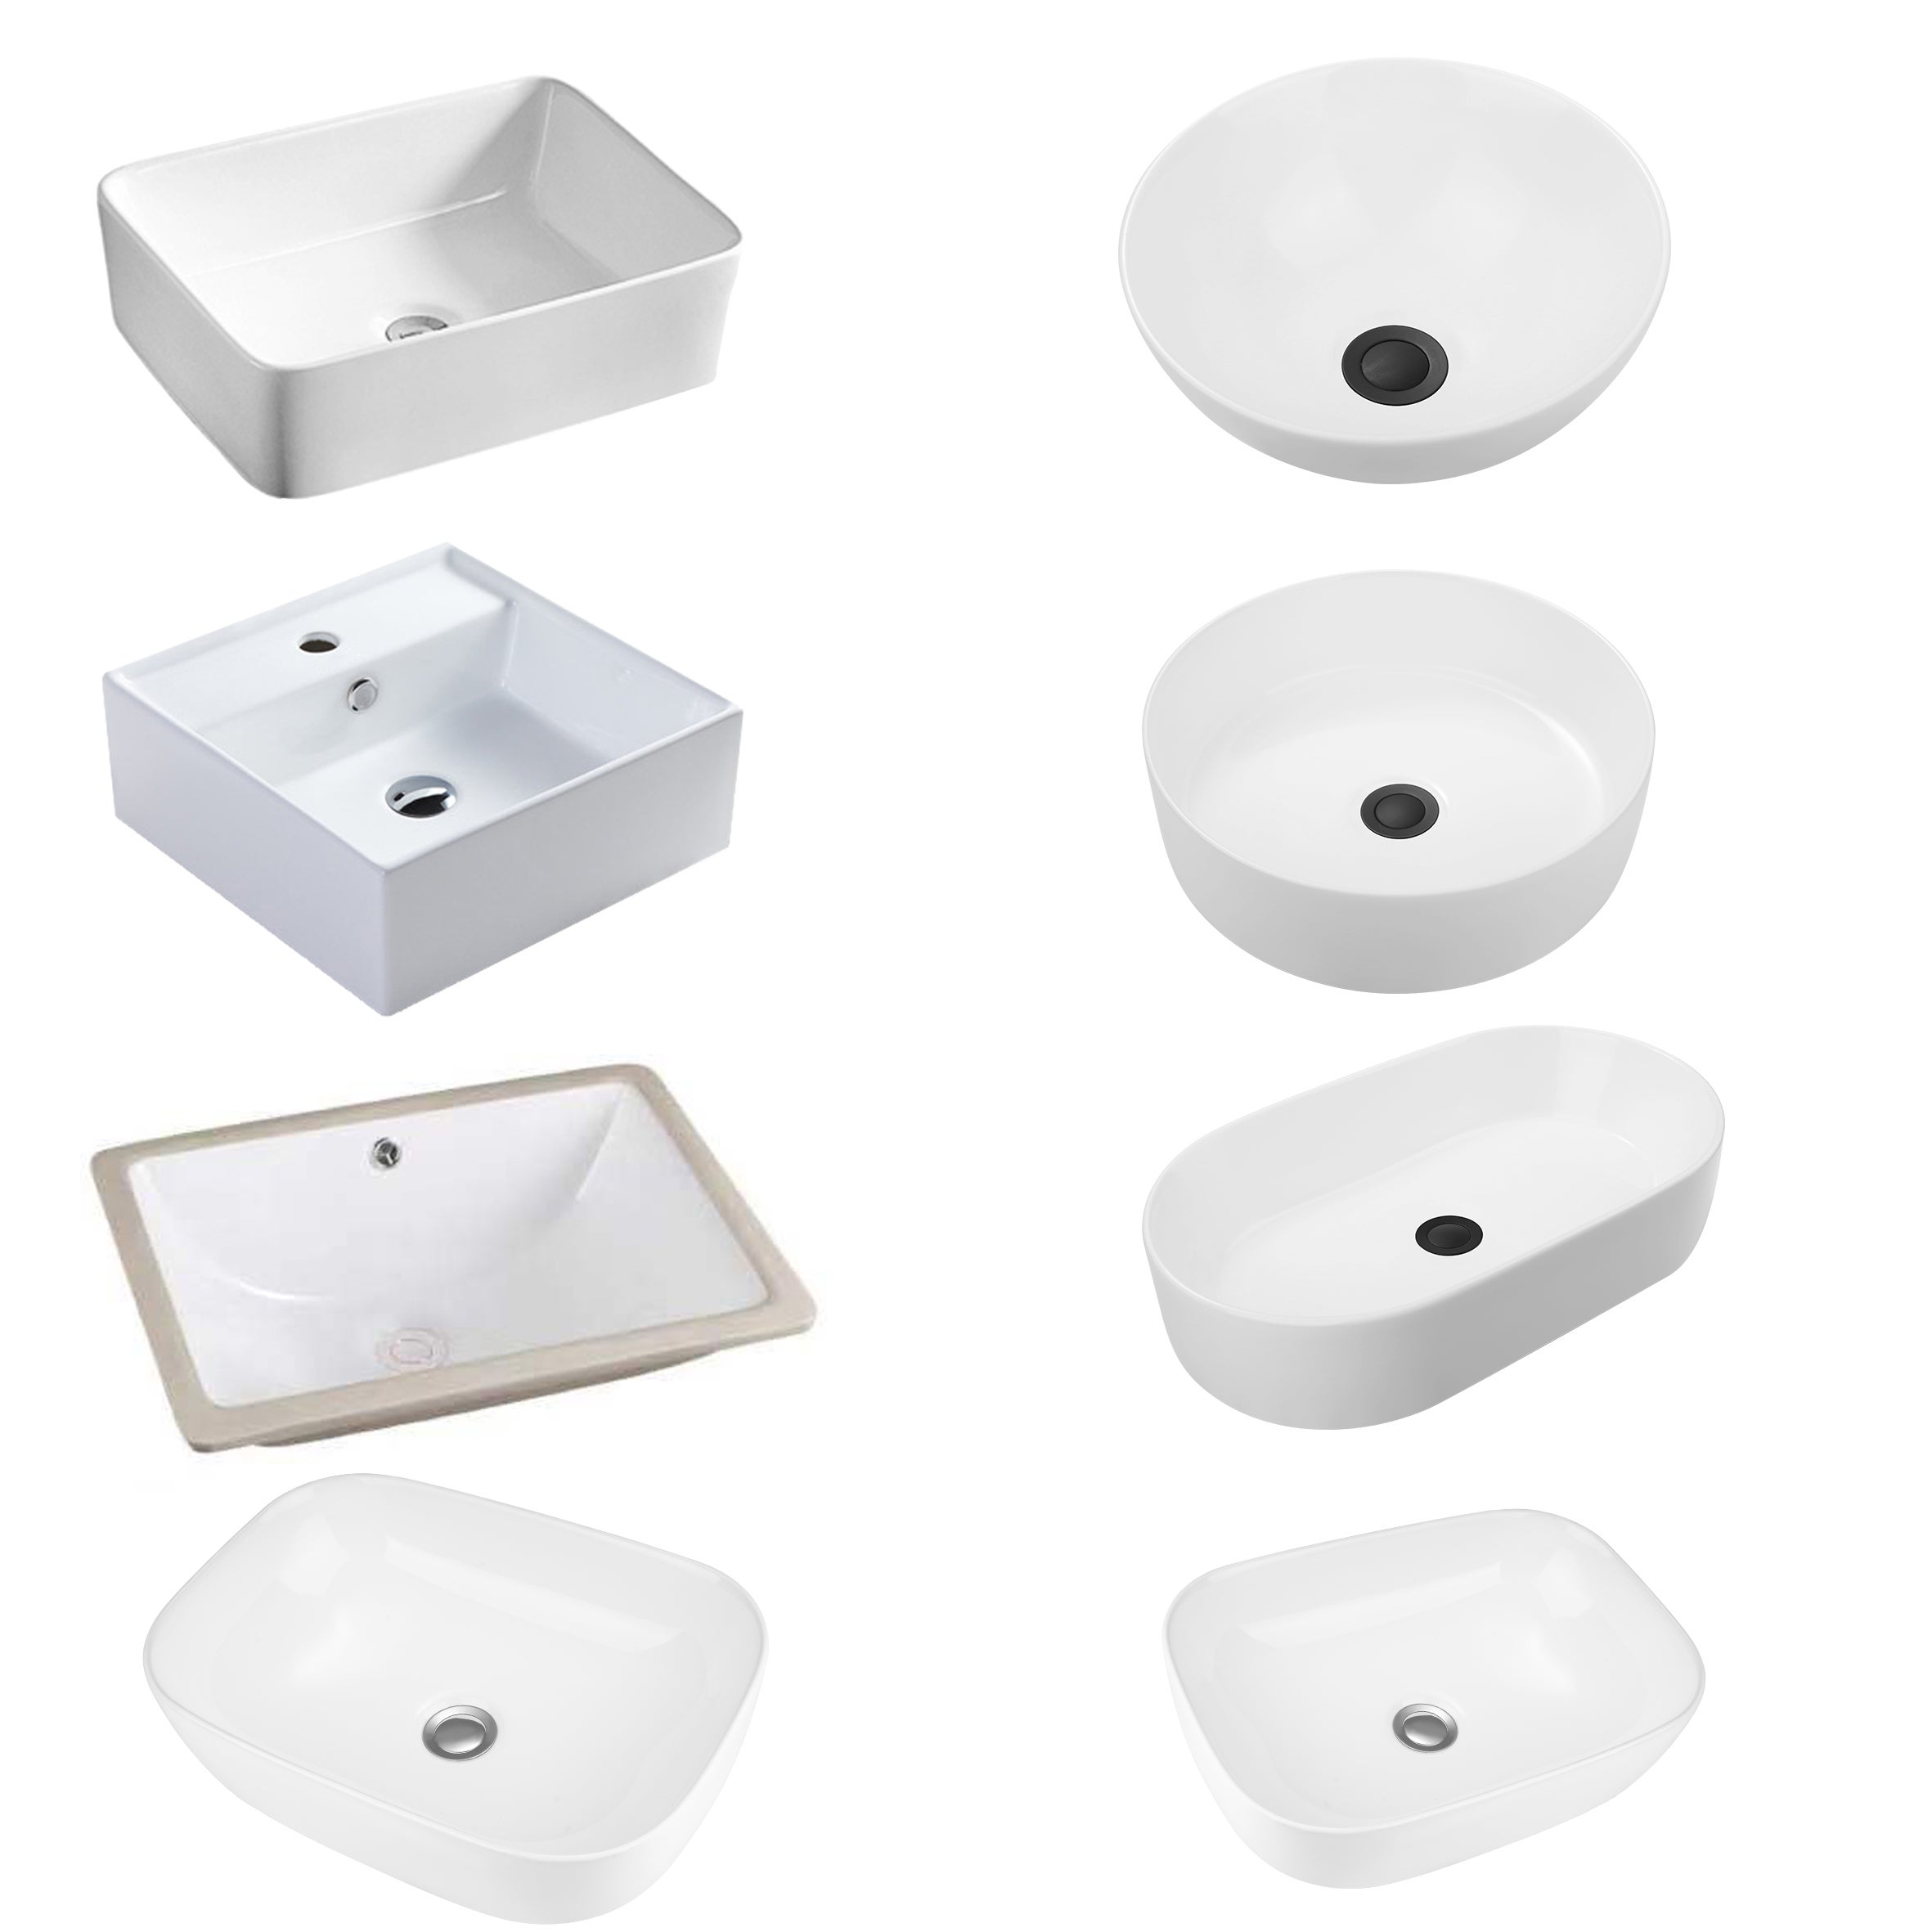 ACA Bathroom Ceramic Basin Above Counter Top Wash Bowl Vanity Sink White Round Square Oval